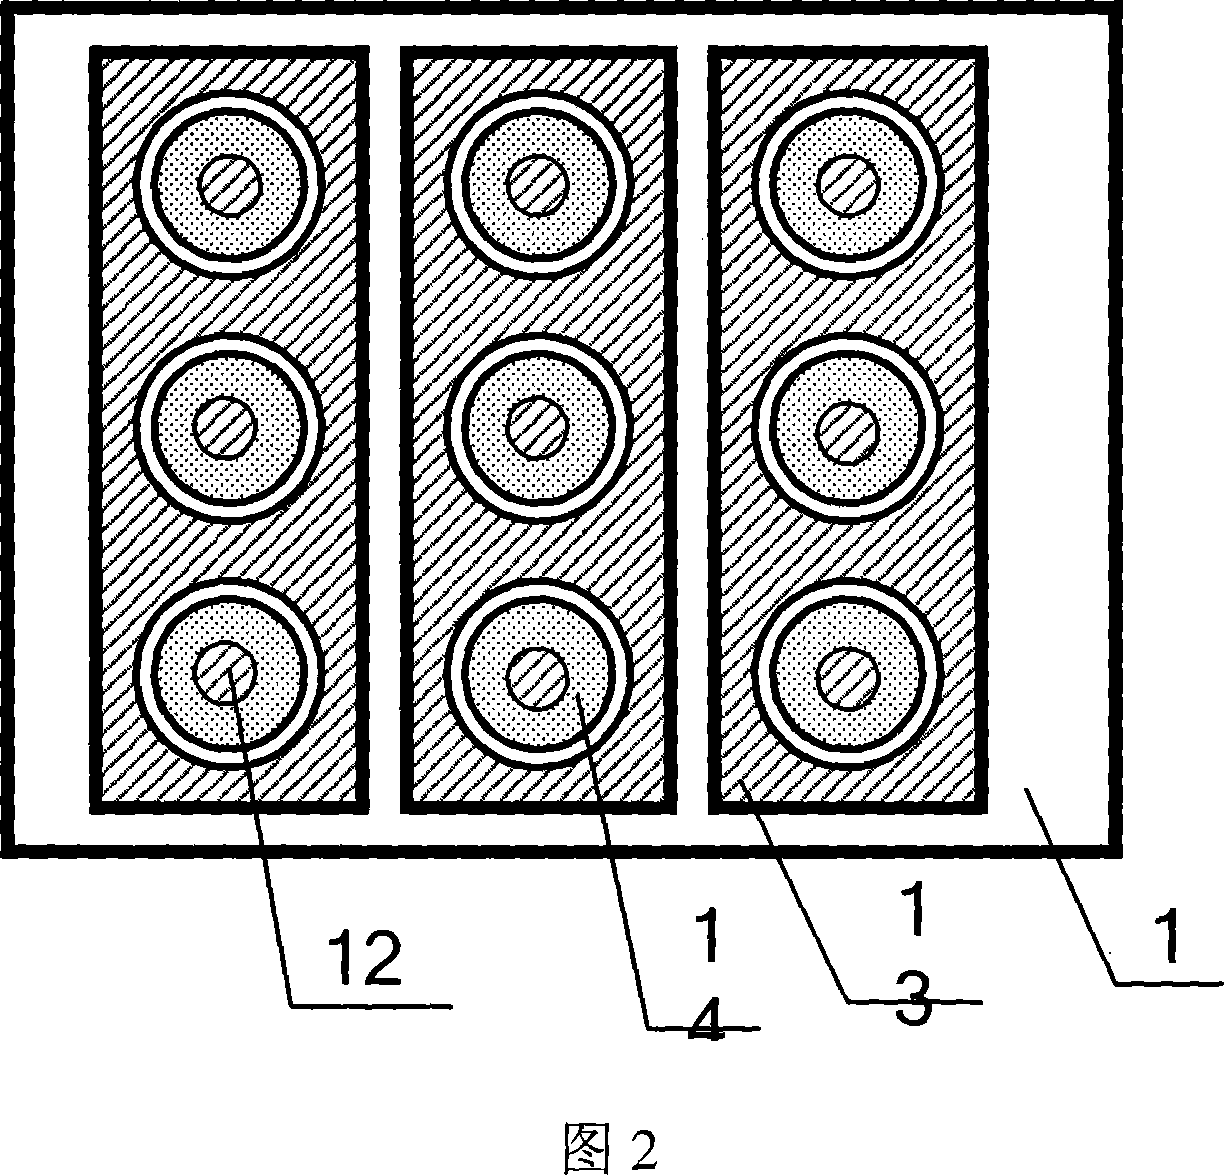 Planar display device with H-shaped sided-grid controlled structure and its production